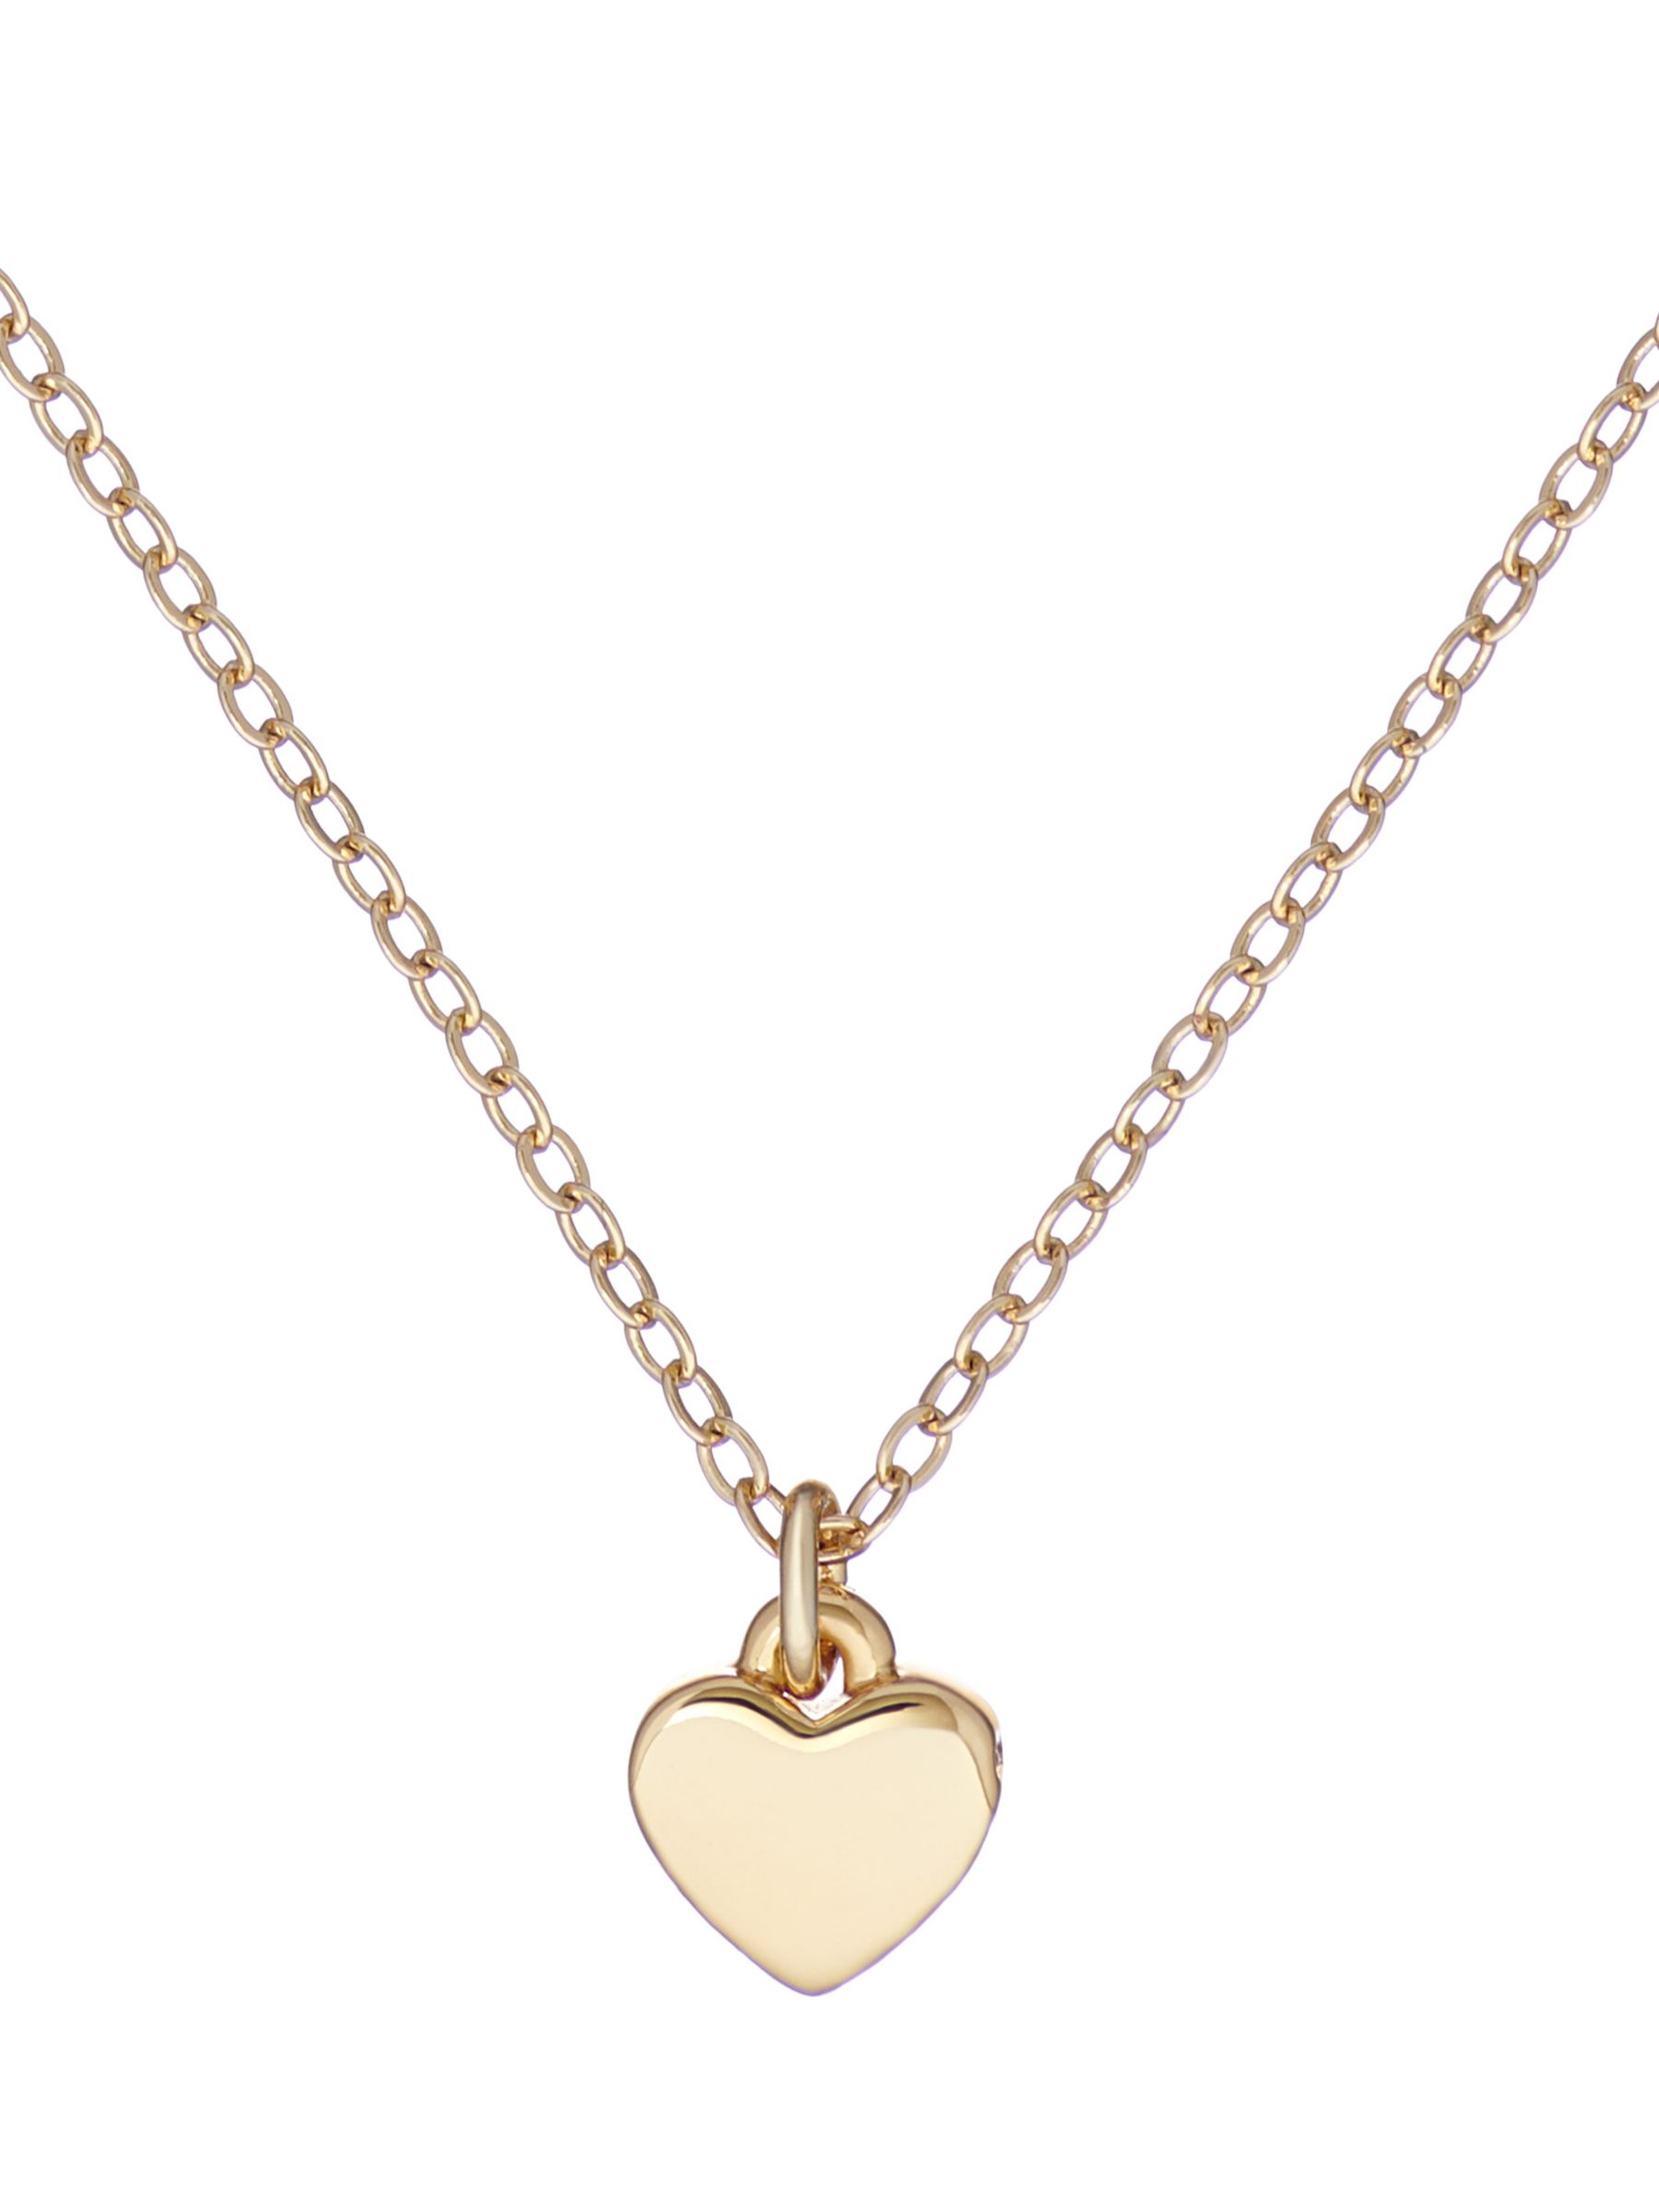 Buy Ted Baker Hara Tiny Heart Pendant Necklace Online at johnlewis.com